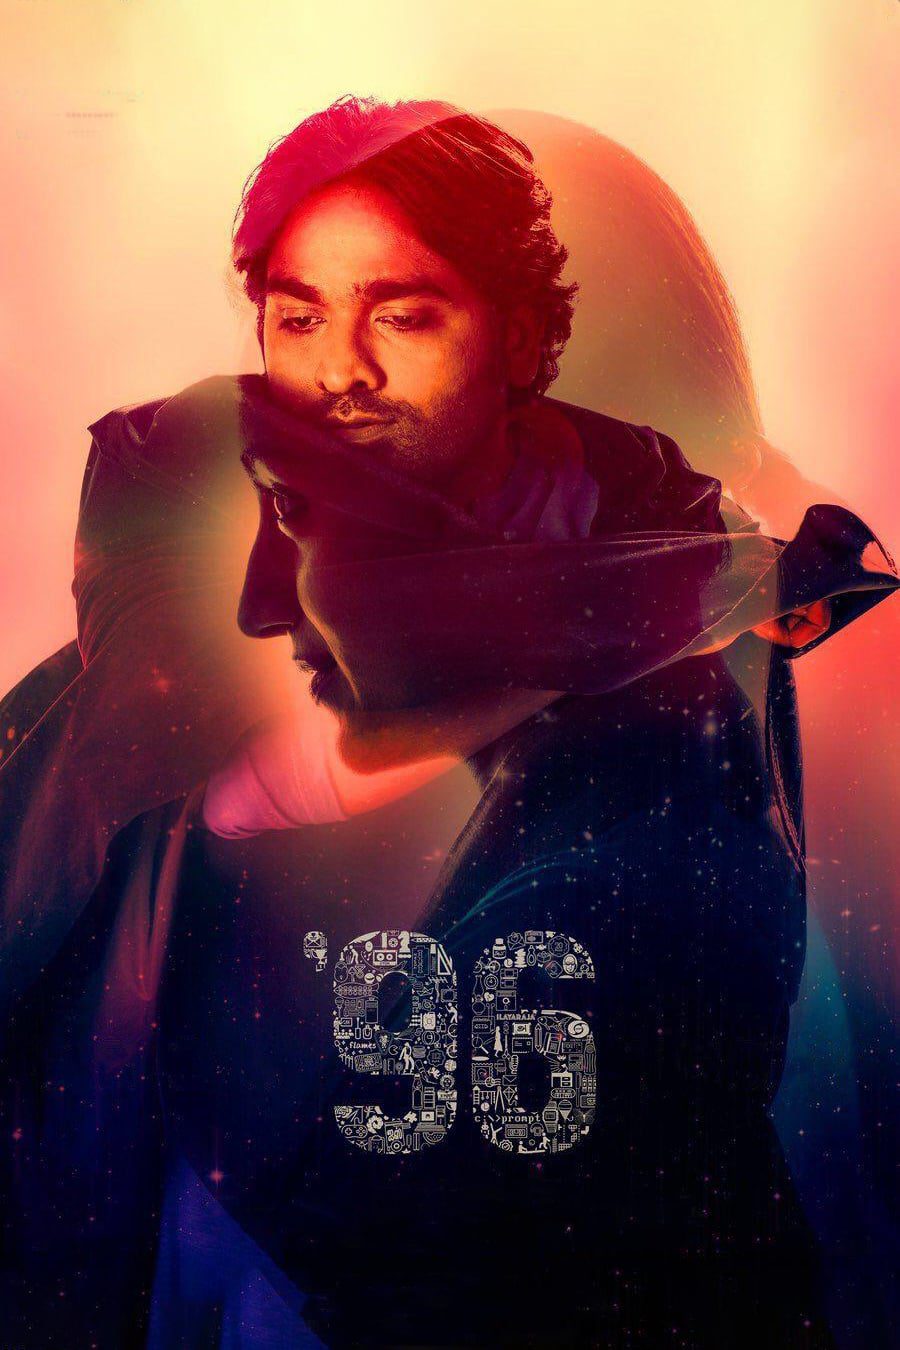 Poster for the movie "96"